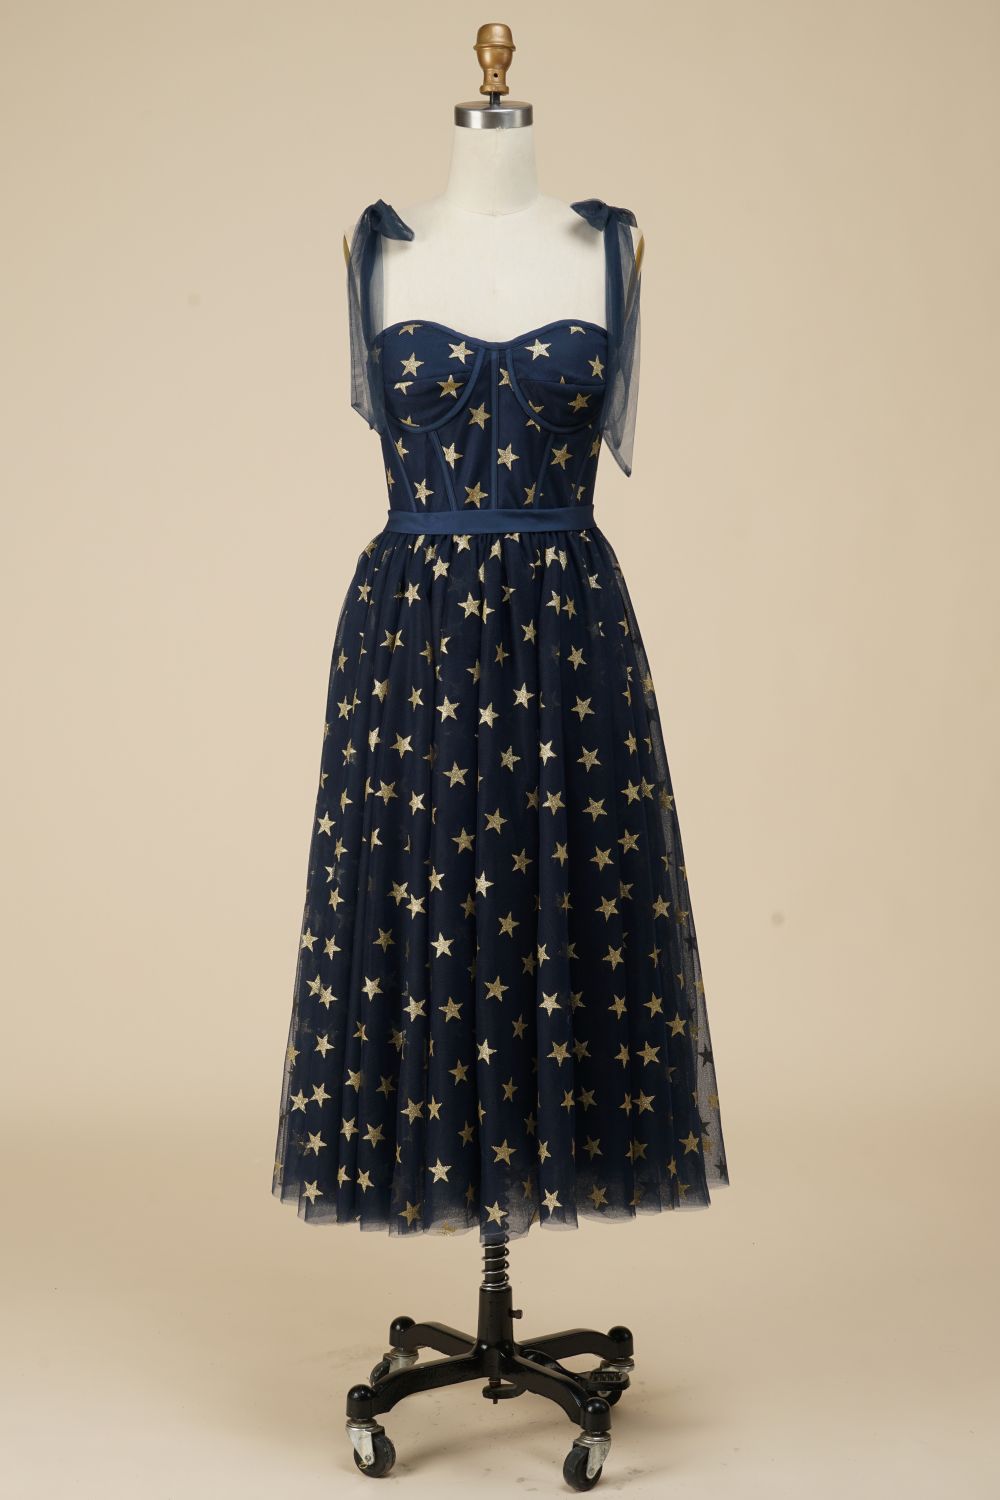 Navy A-line Tea Length Party Dress WIth Star Pattern